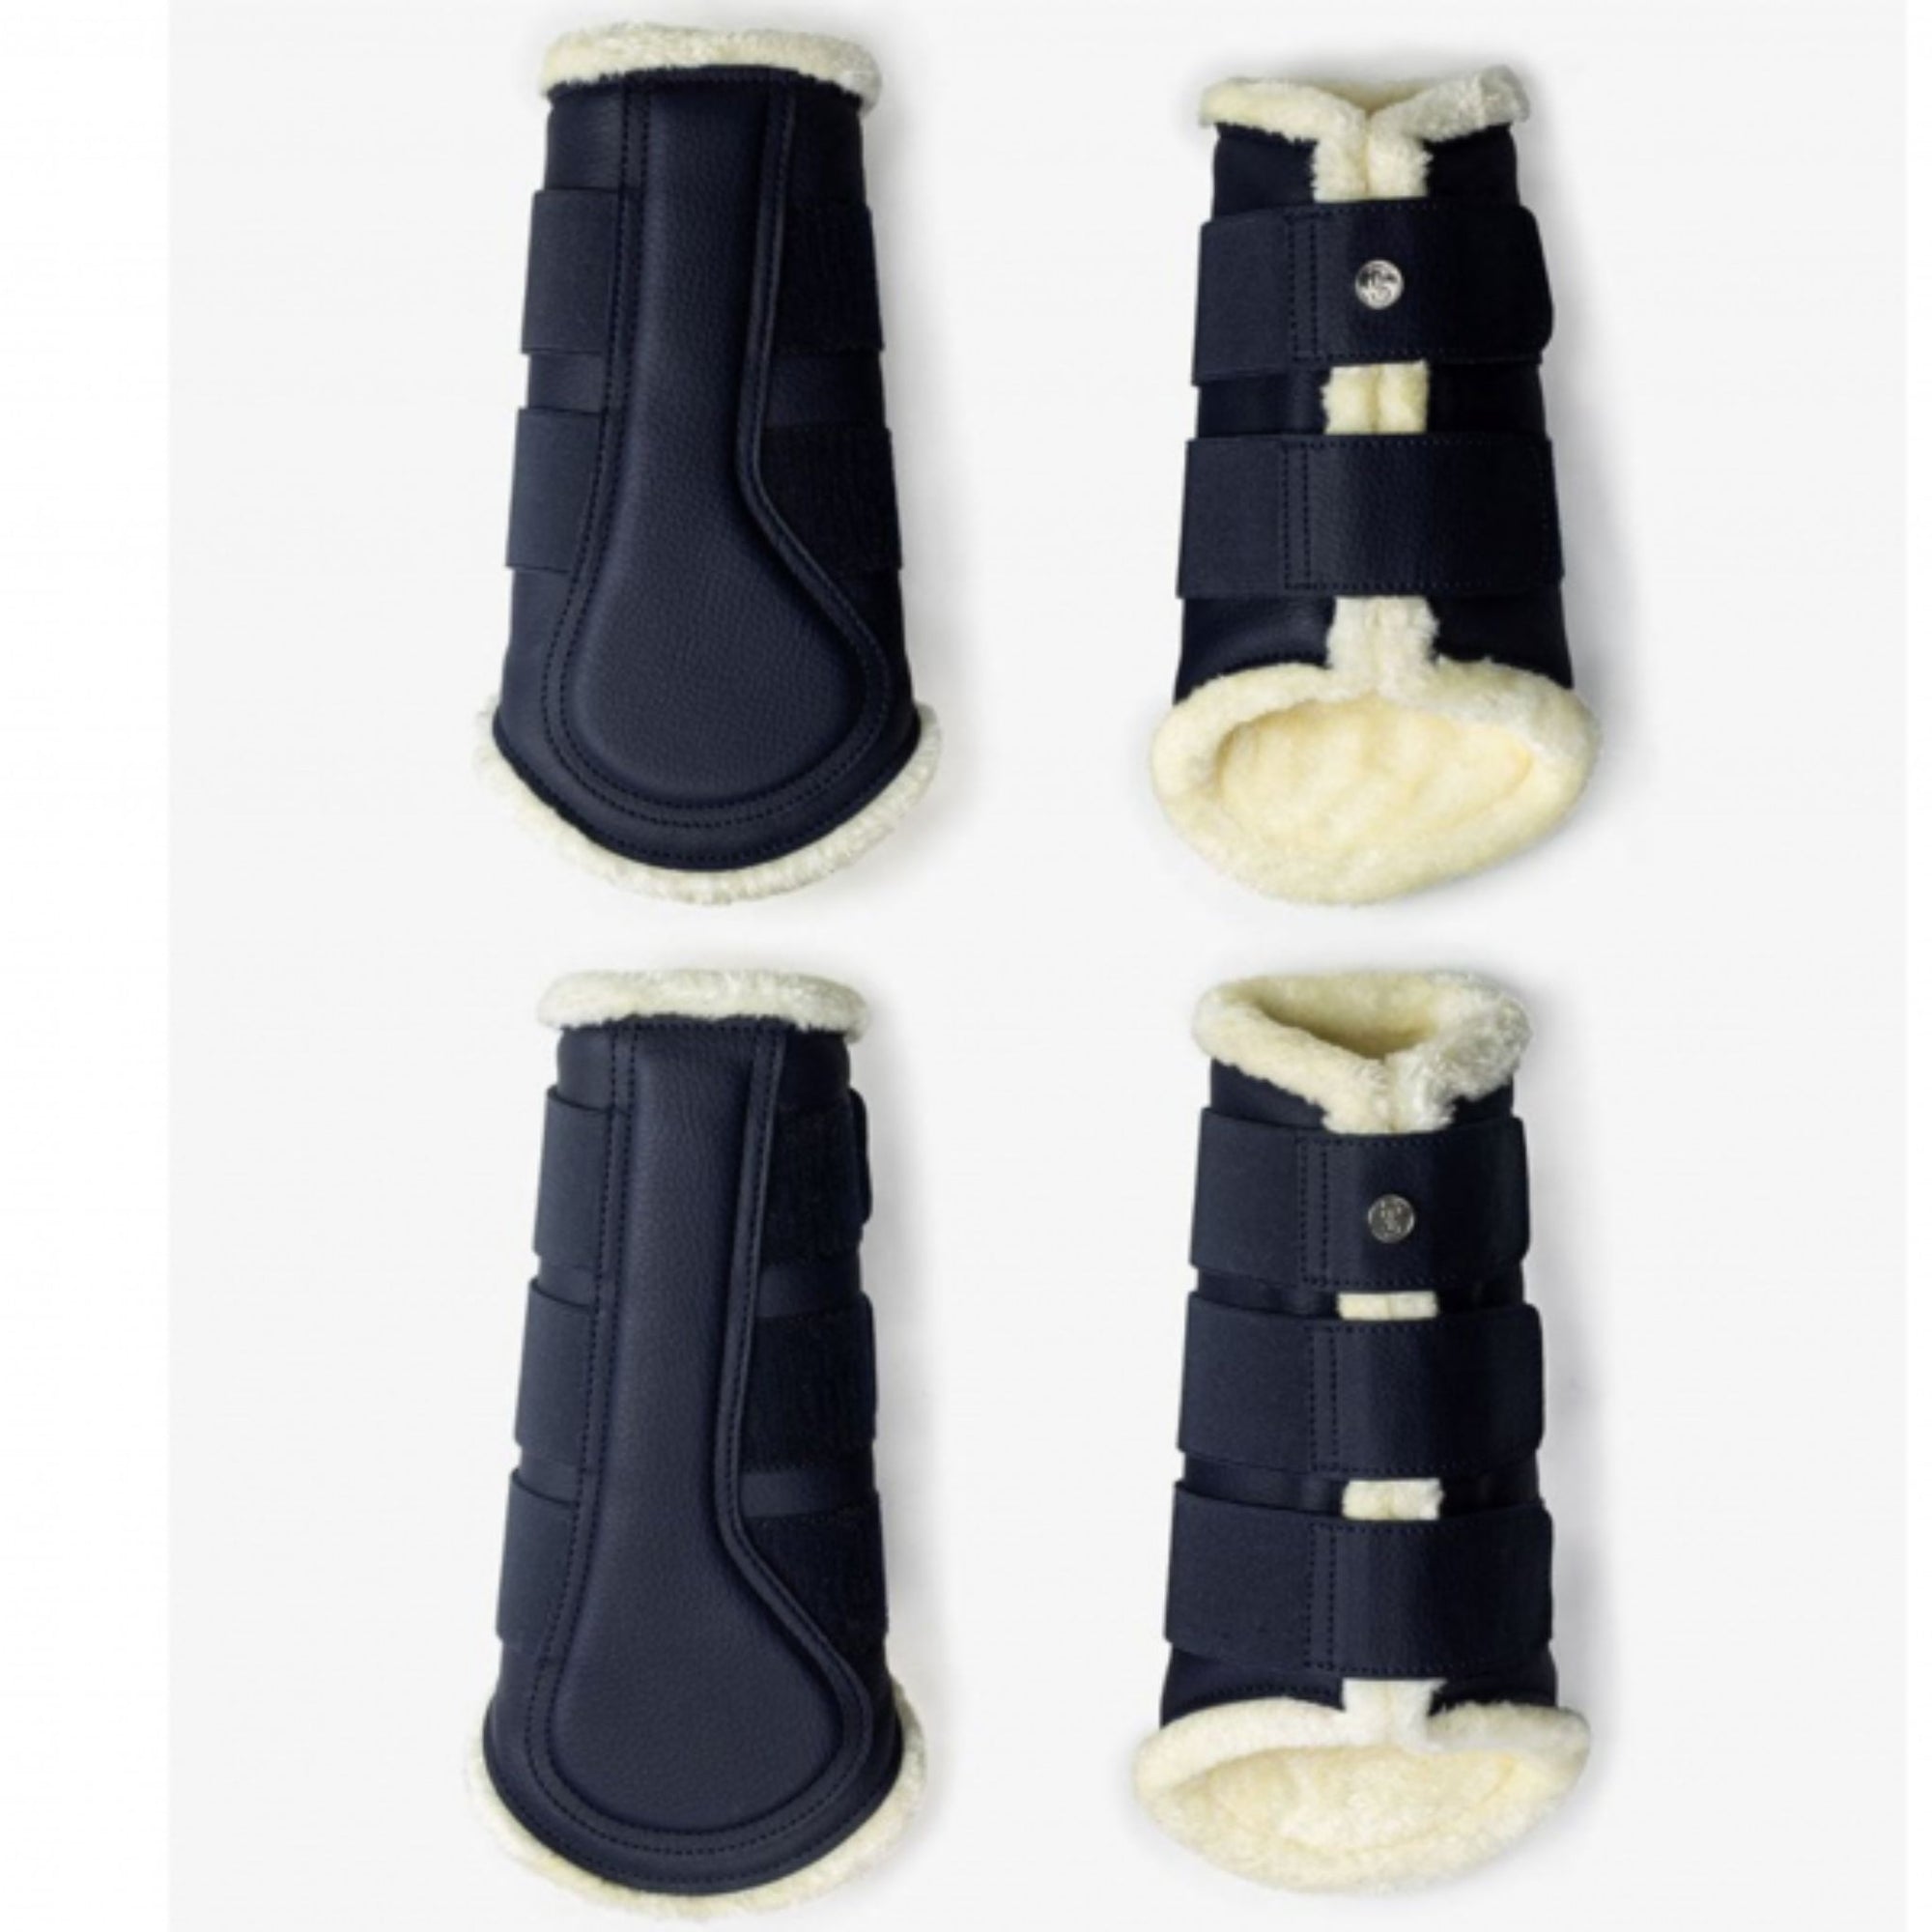 Deep blue brush boots with white inner fluff and a small silver PSOS logo detailing on the top straps